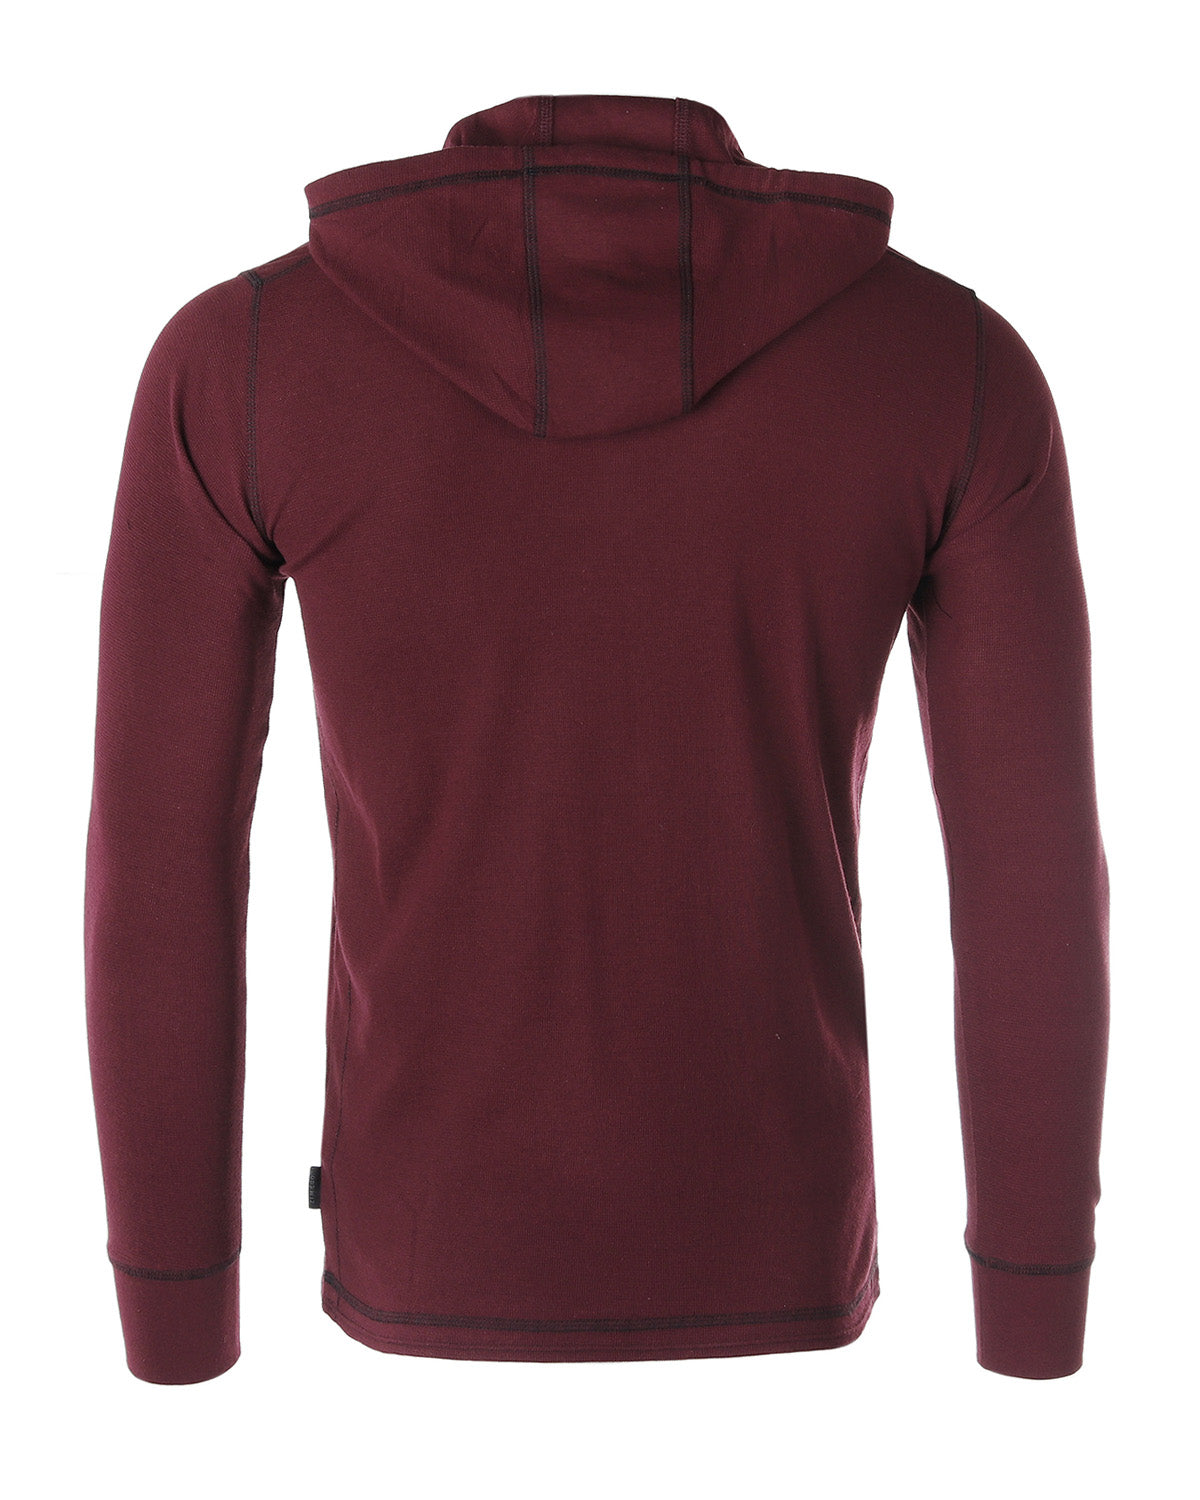 Men's Vintage Dyed Thermal Long Sleeve Lightweight Fashion Hooded Henley